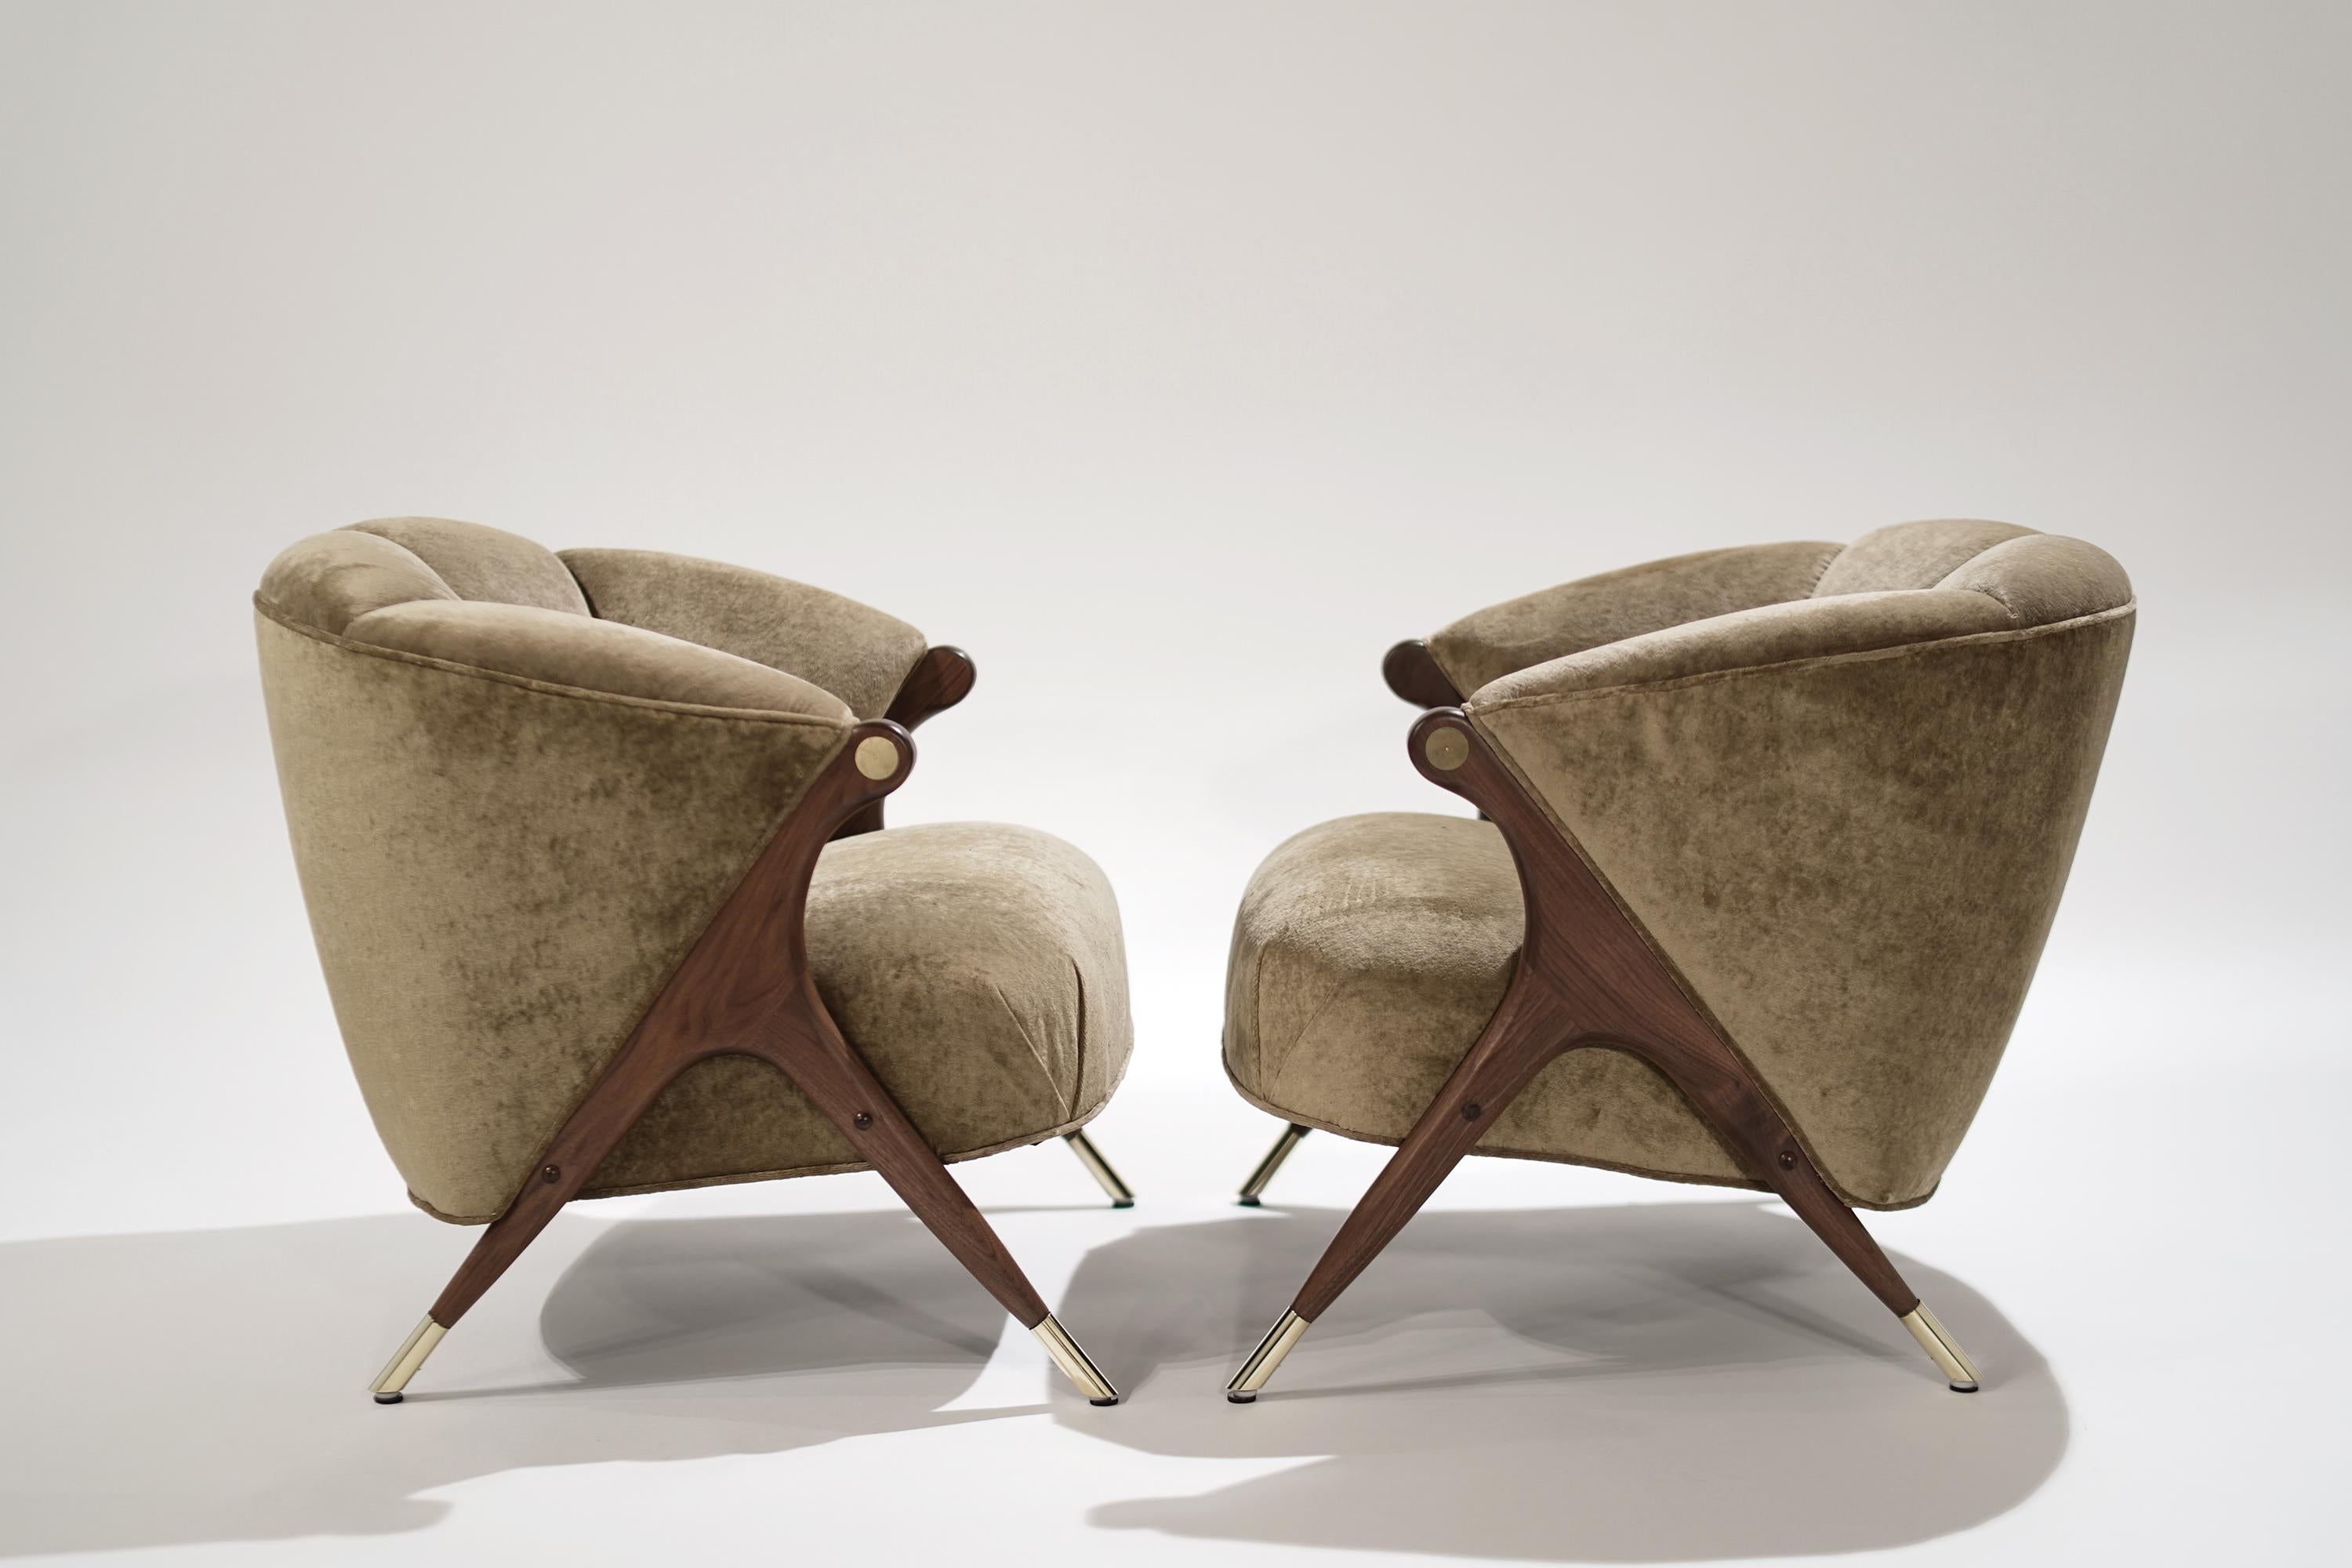 Capture the feeling of cozy conversation and forward momentum. These rare, vintage lounge chairs were made by The Karpen Company of California in the 1950s and artfully restored.
Solid walnut legs gleam with a natural finish and polished brass